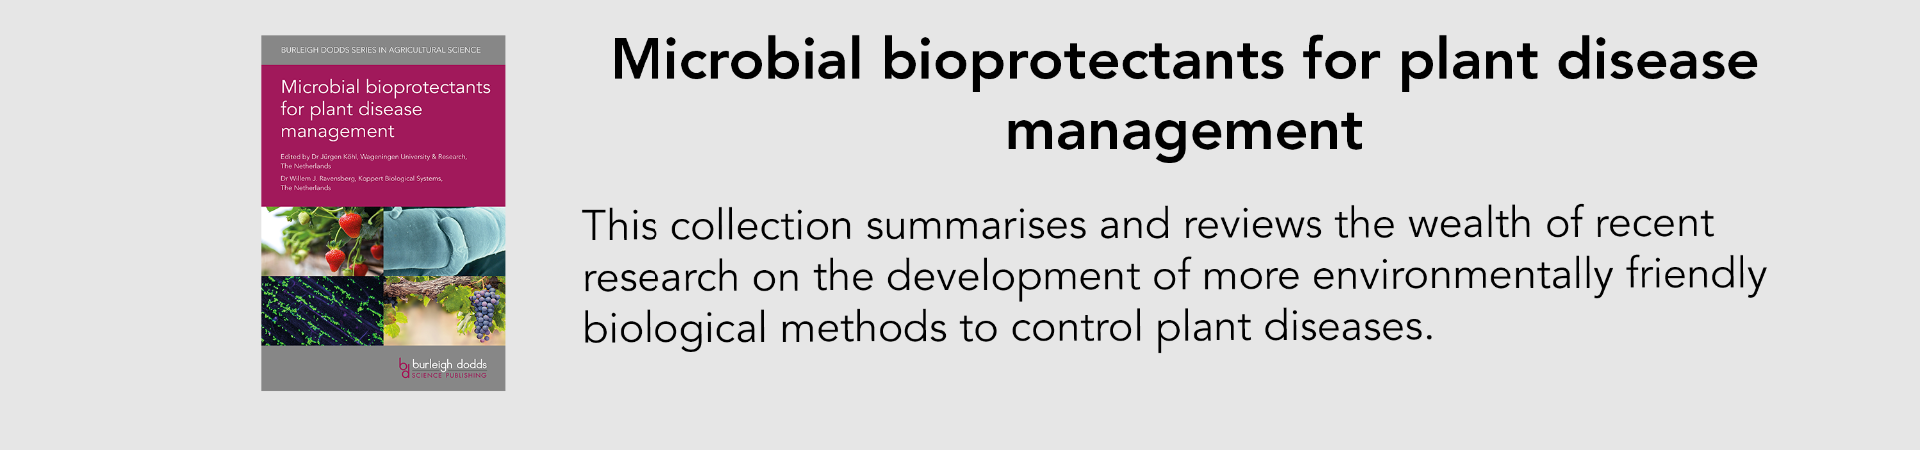 Microbial bioprotectants for plant disease management